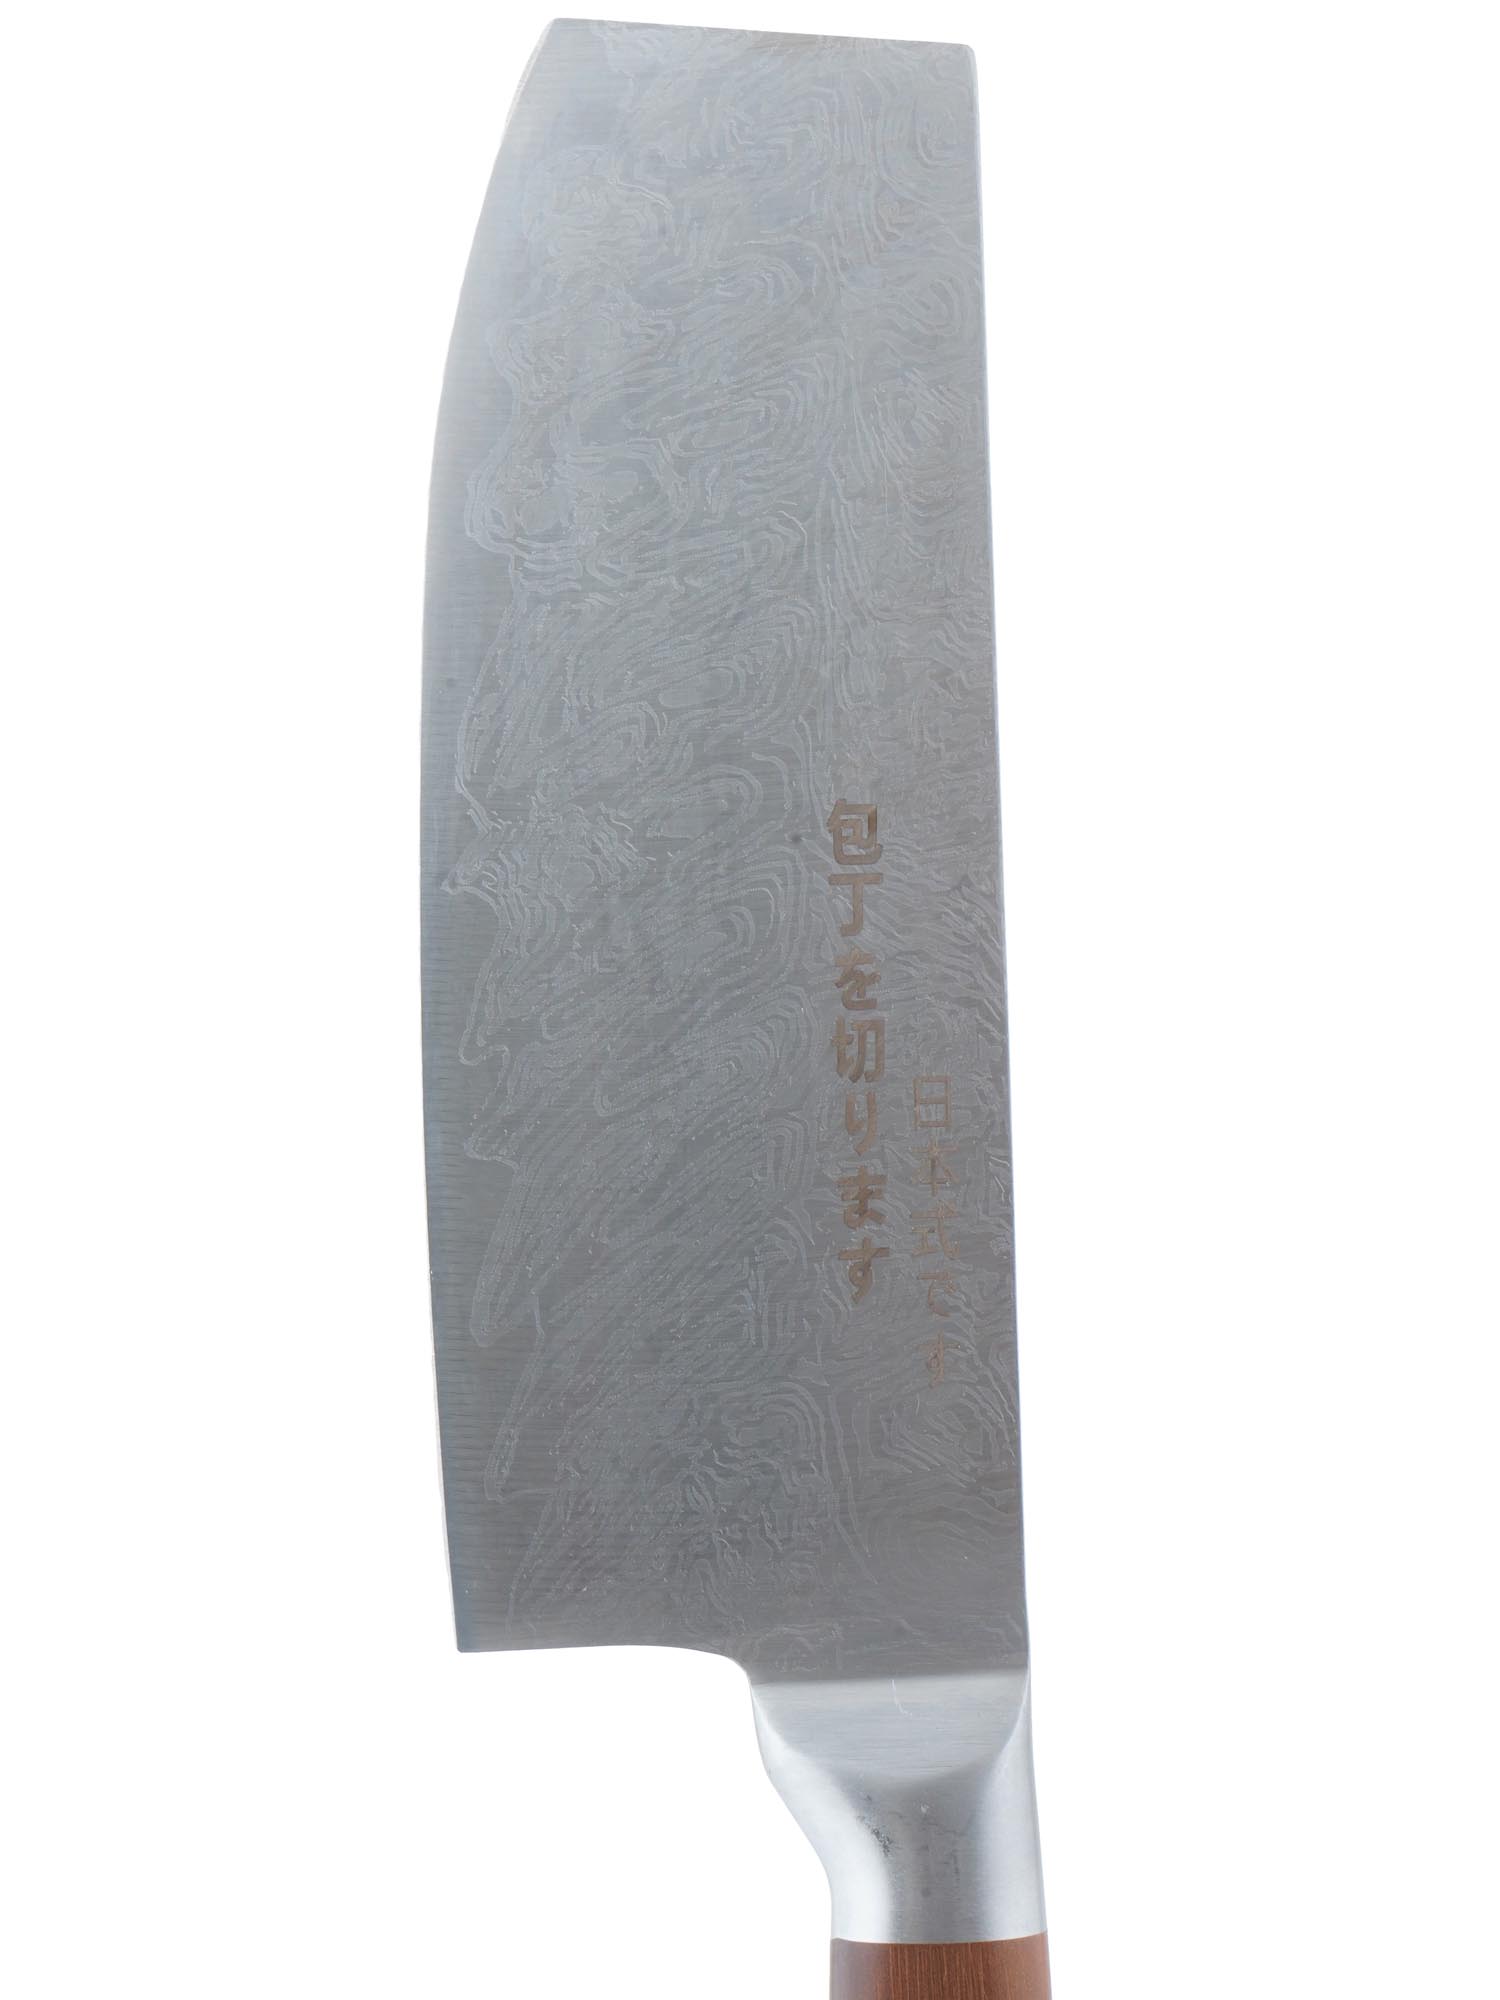 SET OF FOUR STAINLESS STEEL JAPANESE KNIVES PIC-4